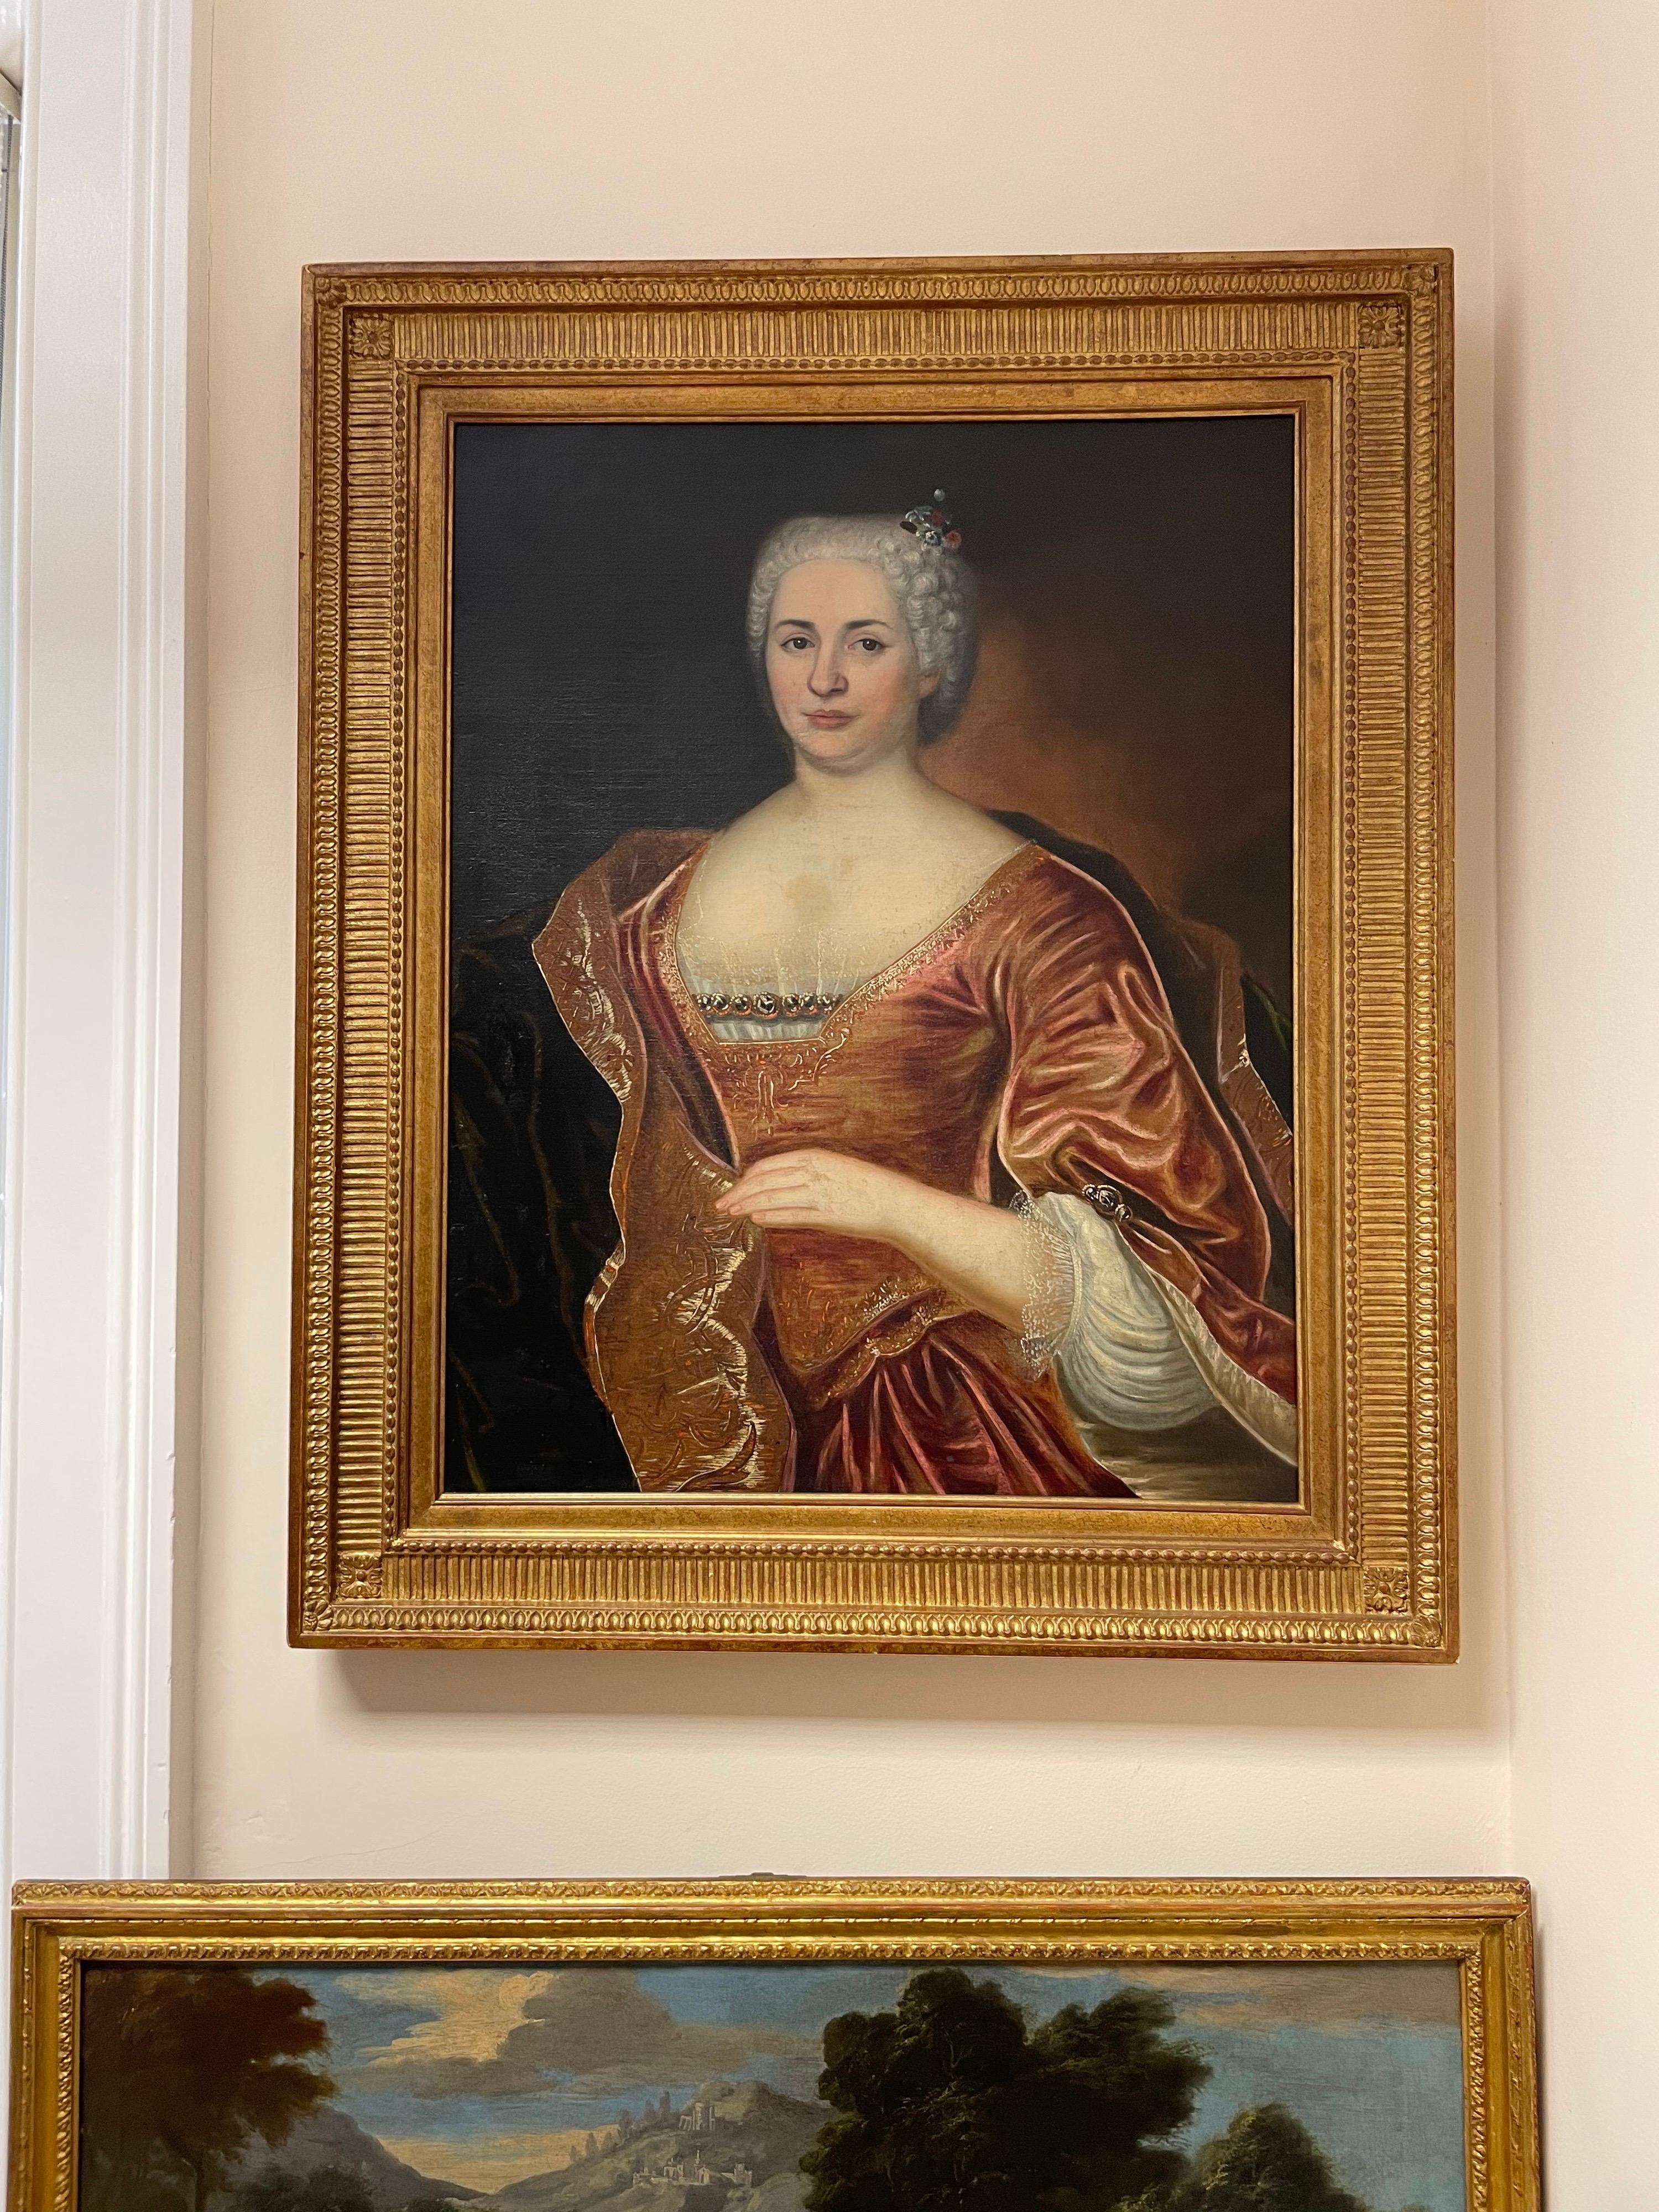 Fine 1700's French Old Master Oil Portrait of Aristocratic Lady in Silk Dress - Painting by 1700's French Master